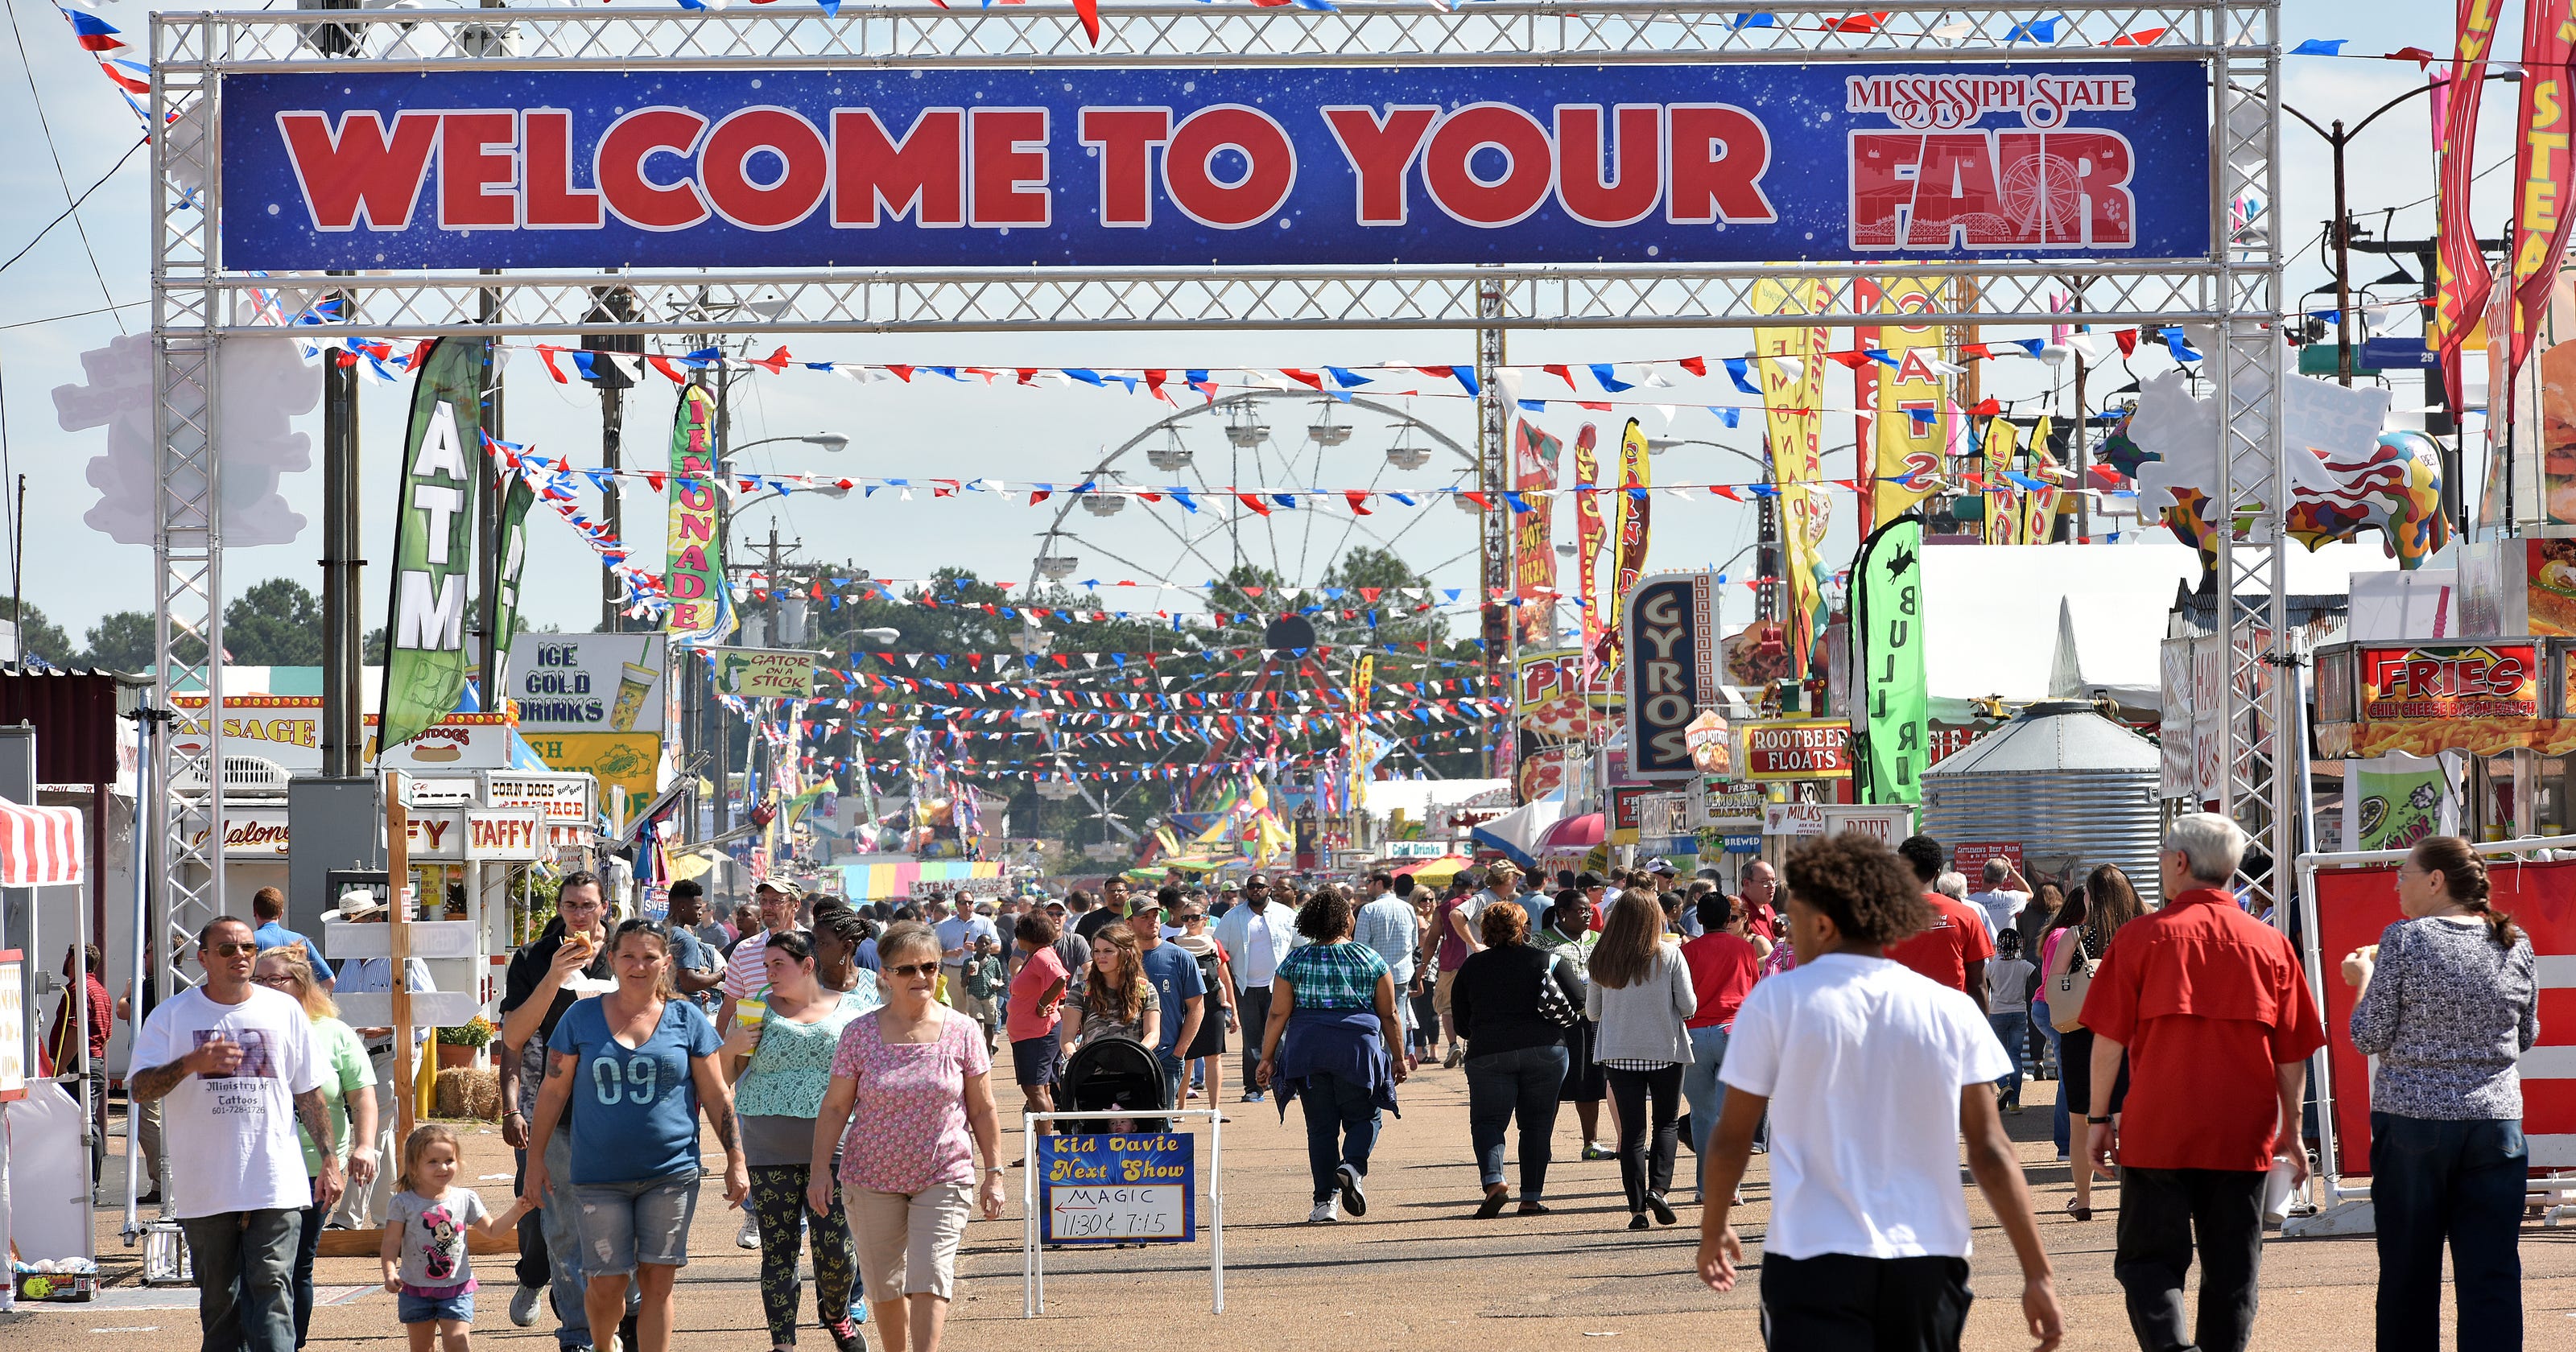 MS State Fair sets record